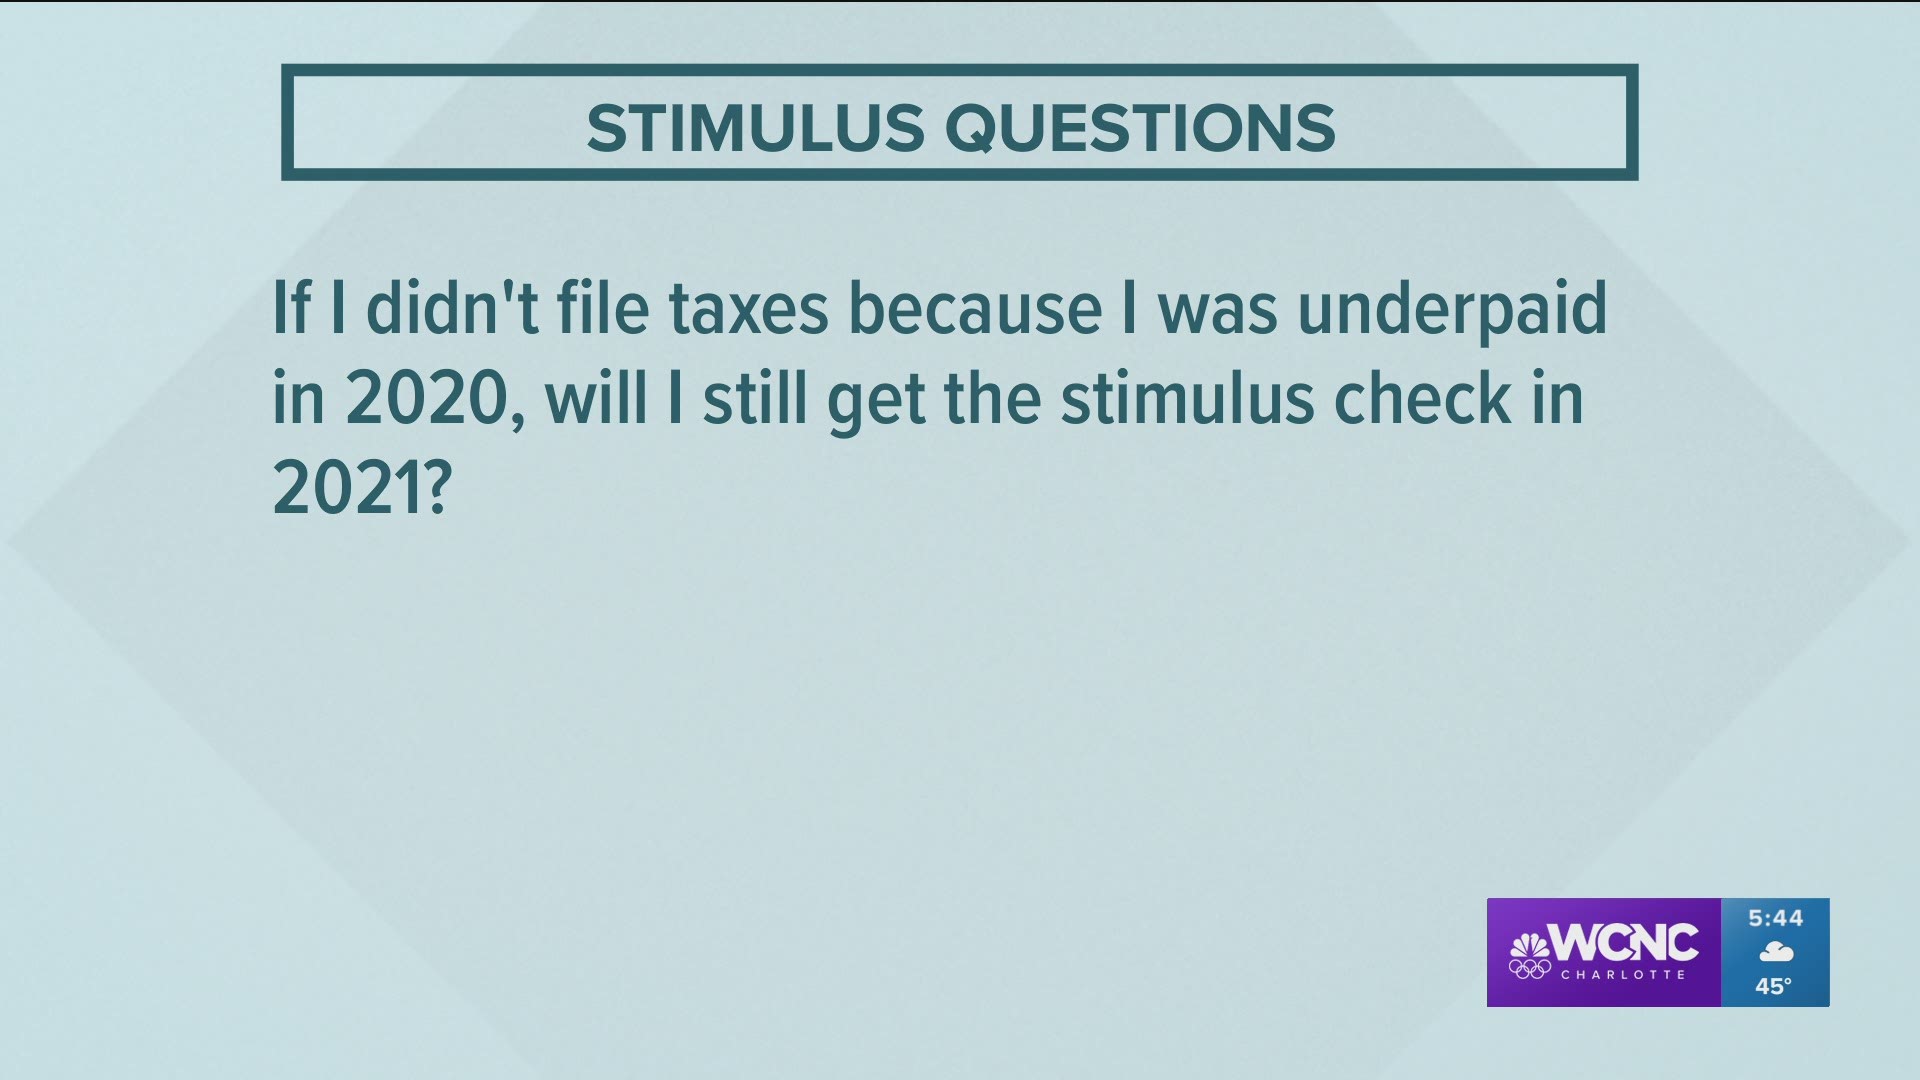 If you didn't file taxes in 2020, will you get a stimulus check?